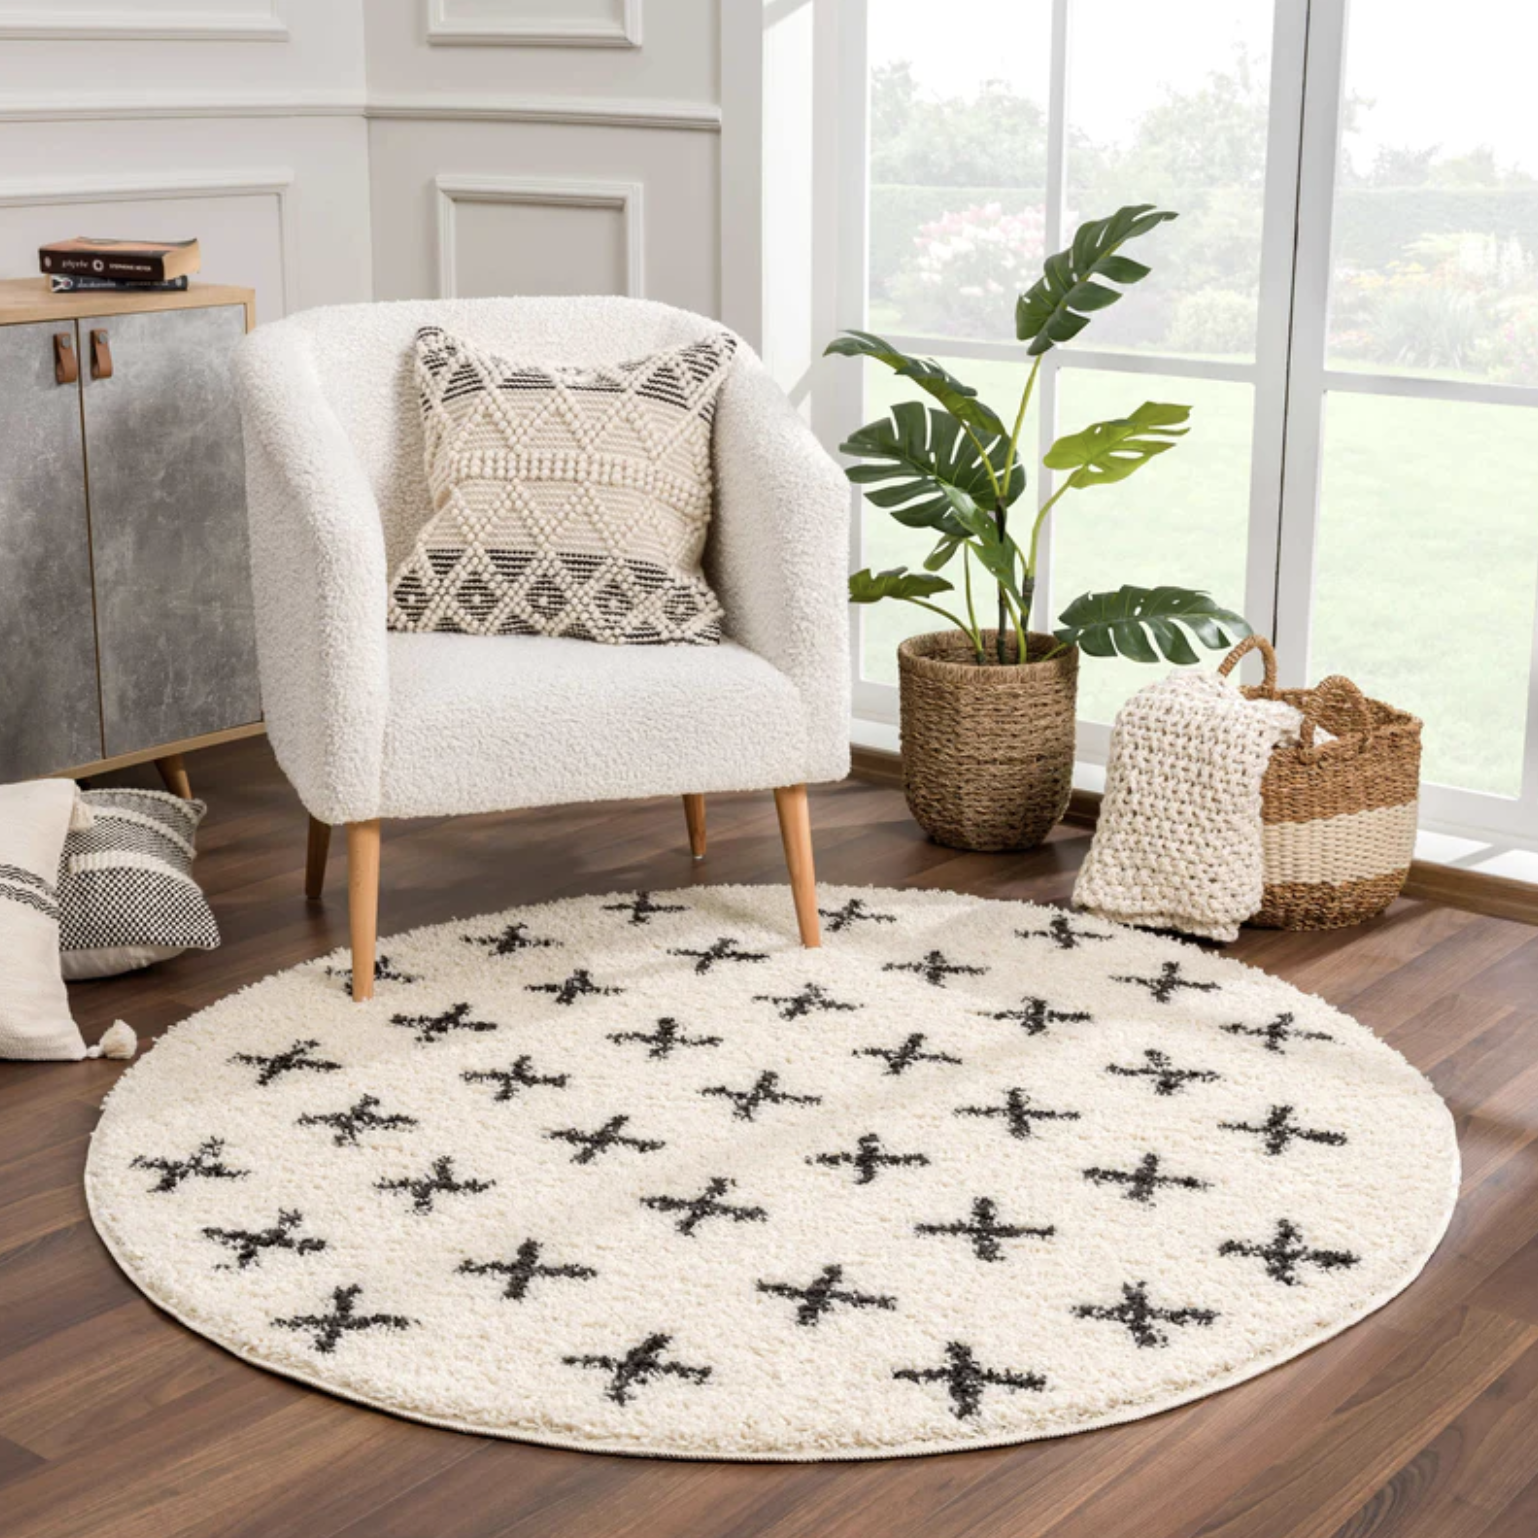 Round white textured rug and black plus sign pattern throughout